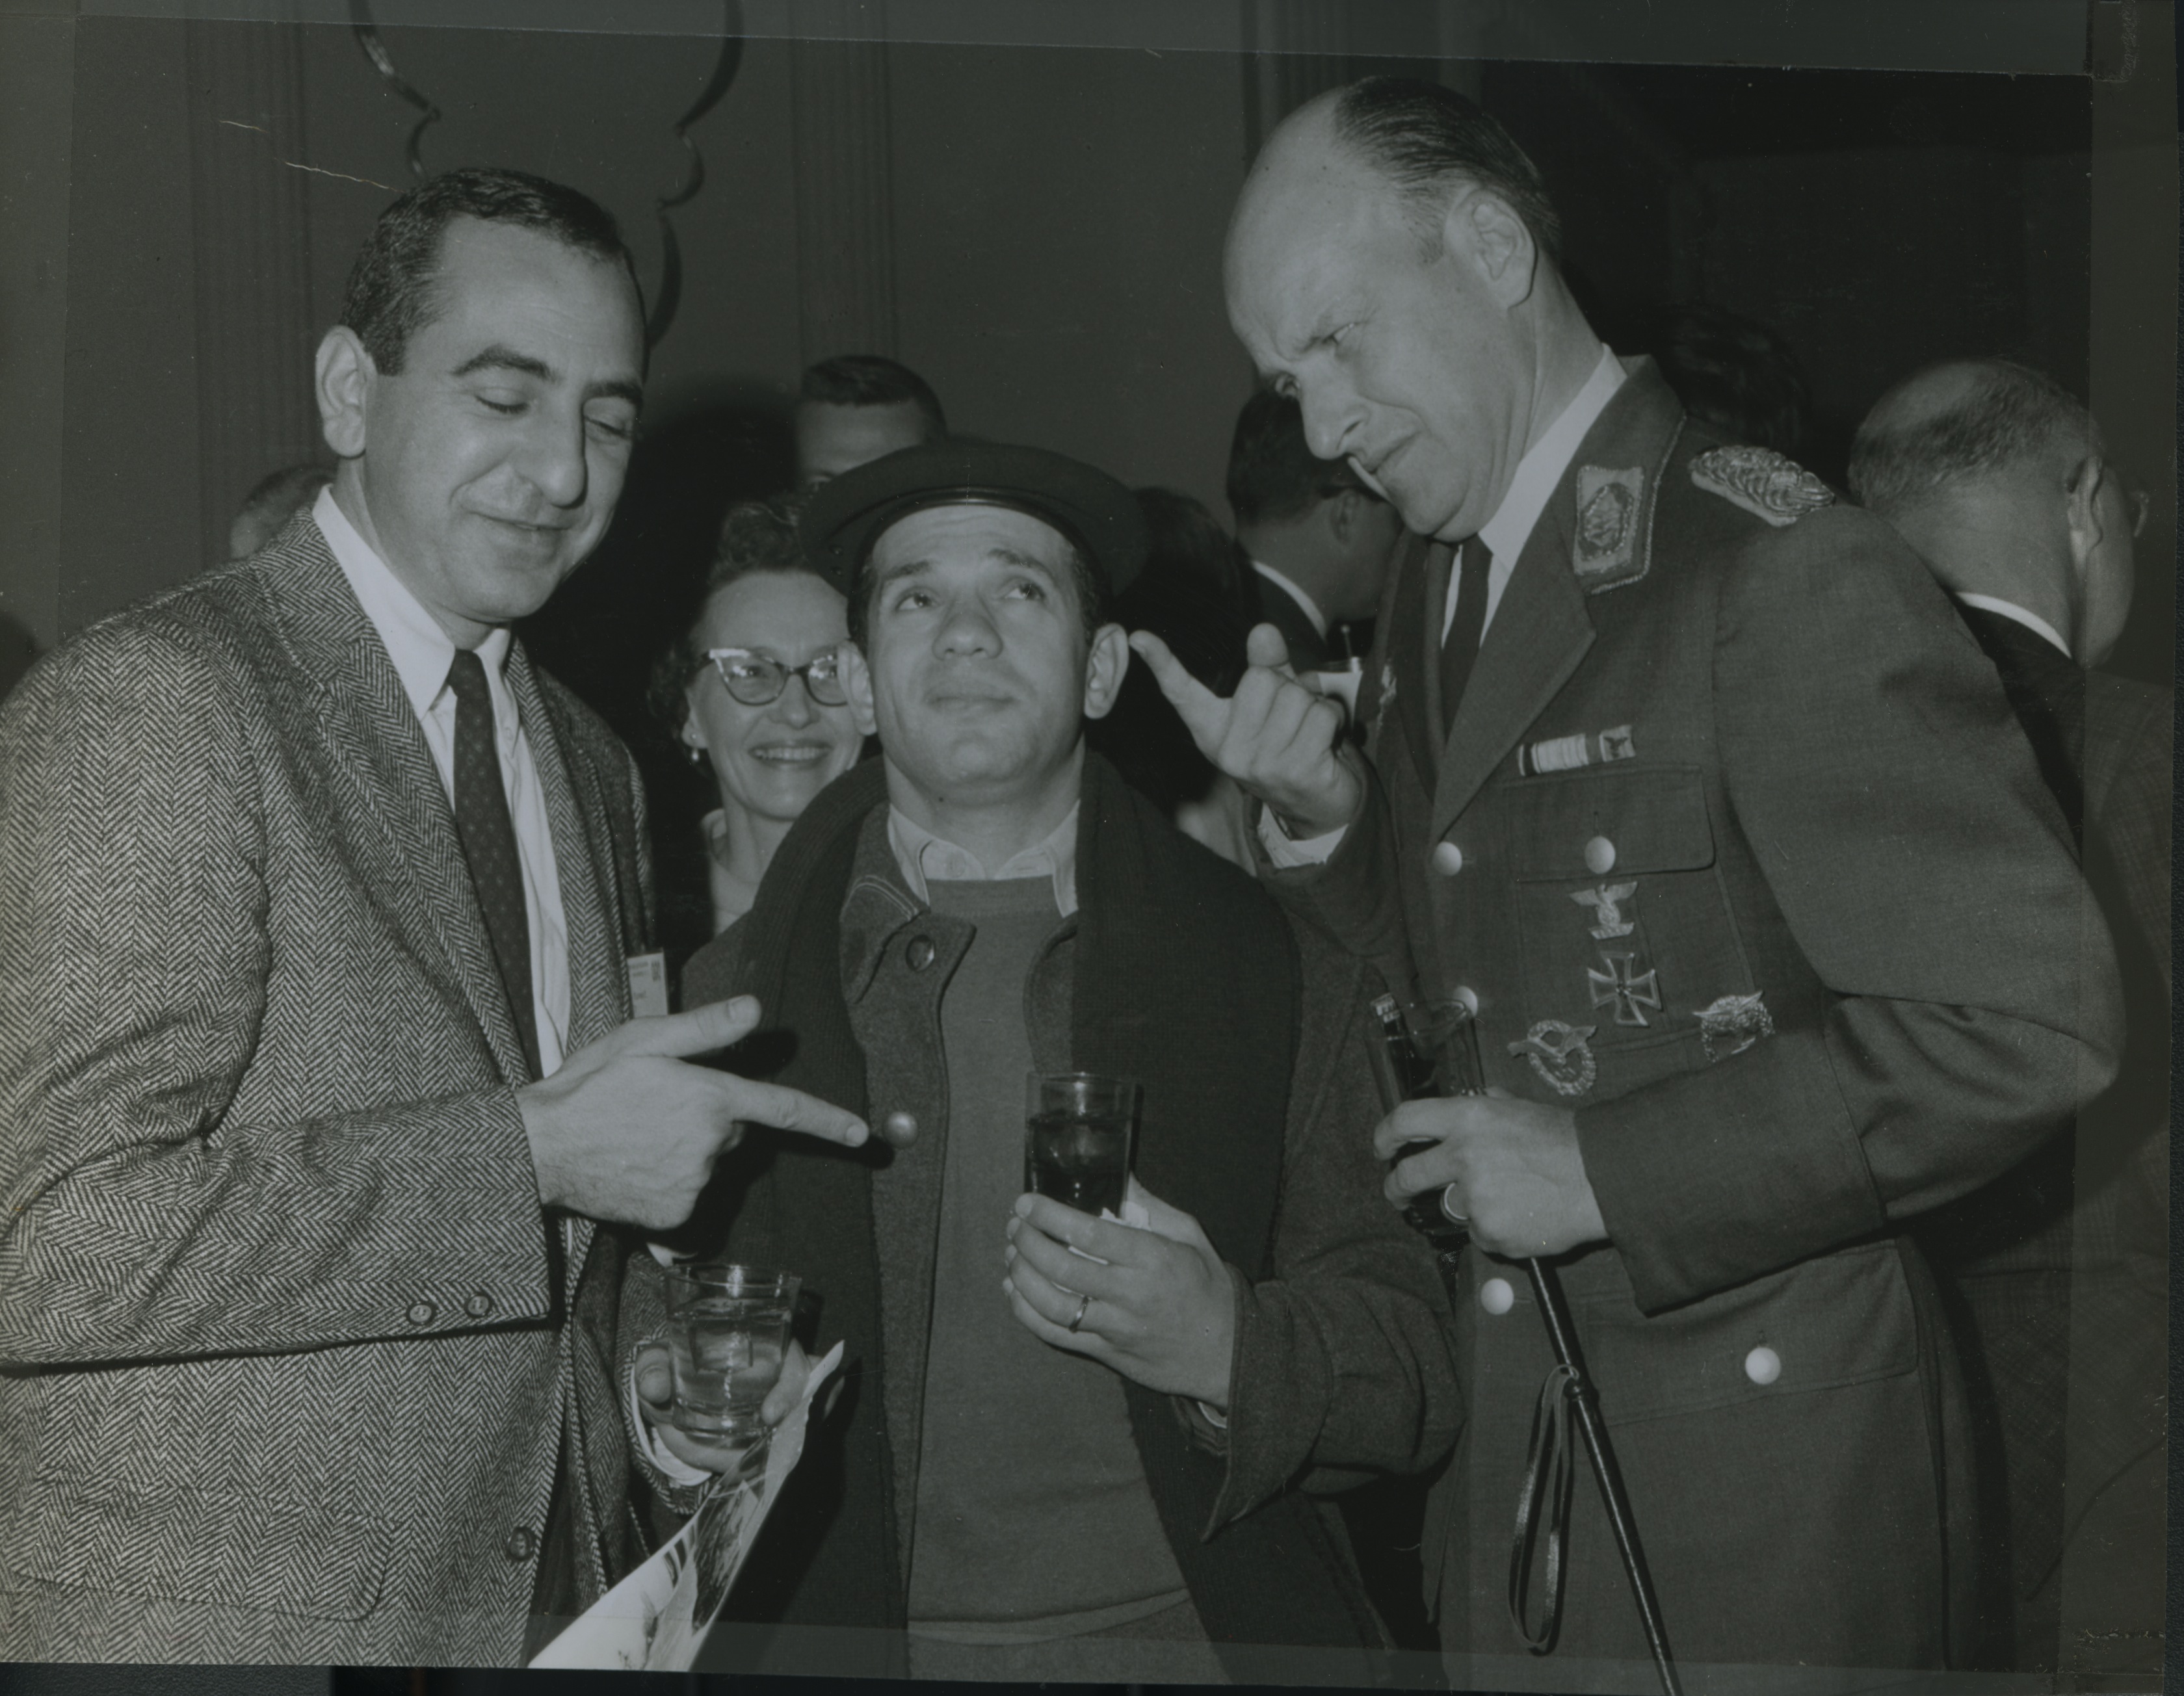 Actors Robert Clary, and Werner Klemperer of "Hogan's Heroes". Photo courtesy of The Robert Clary Archives.